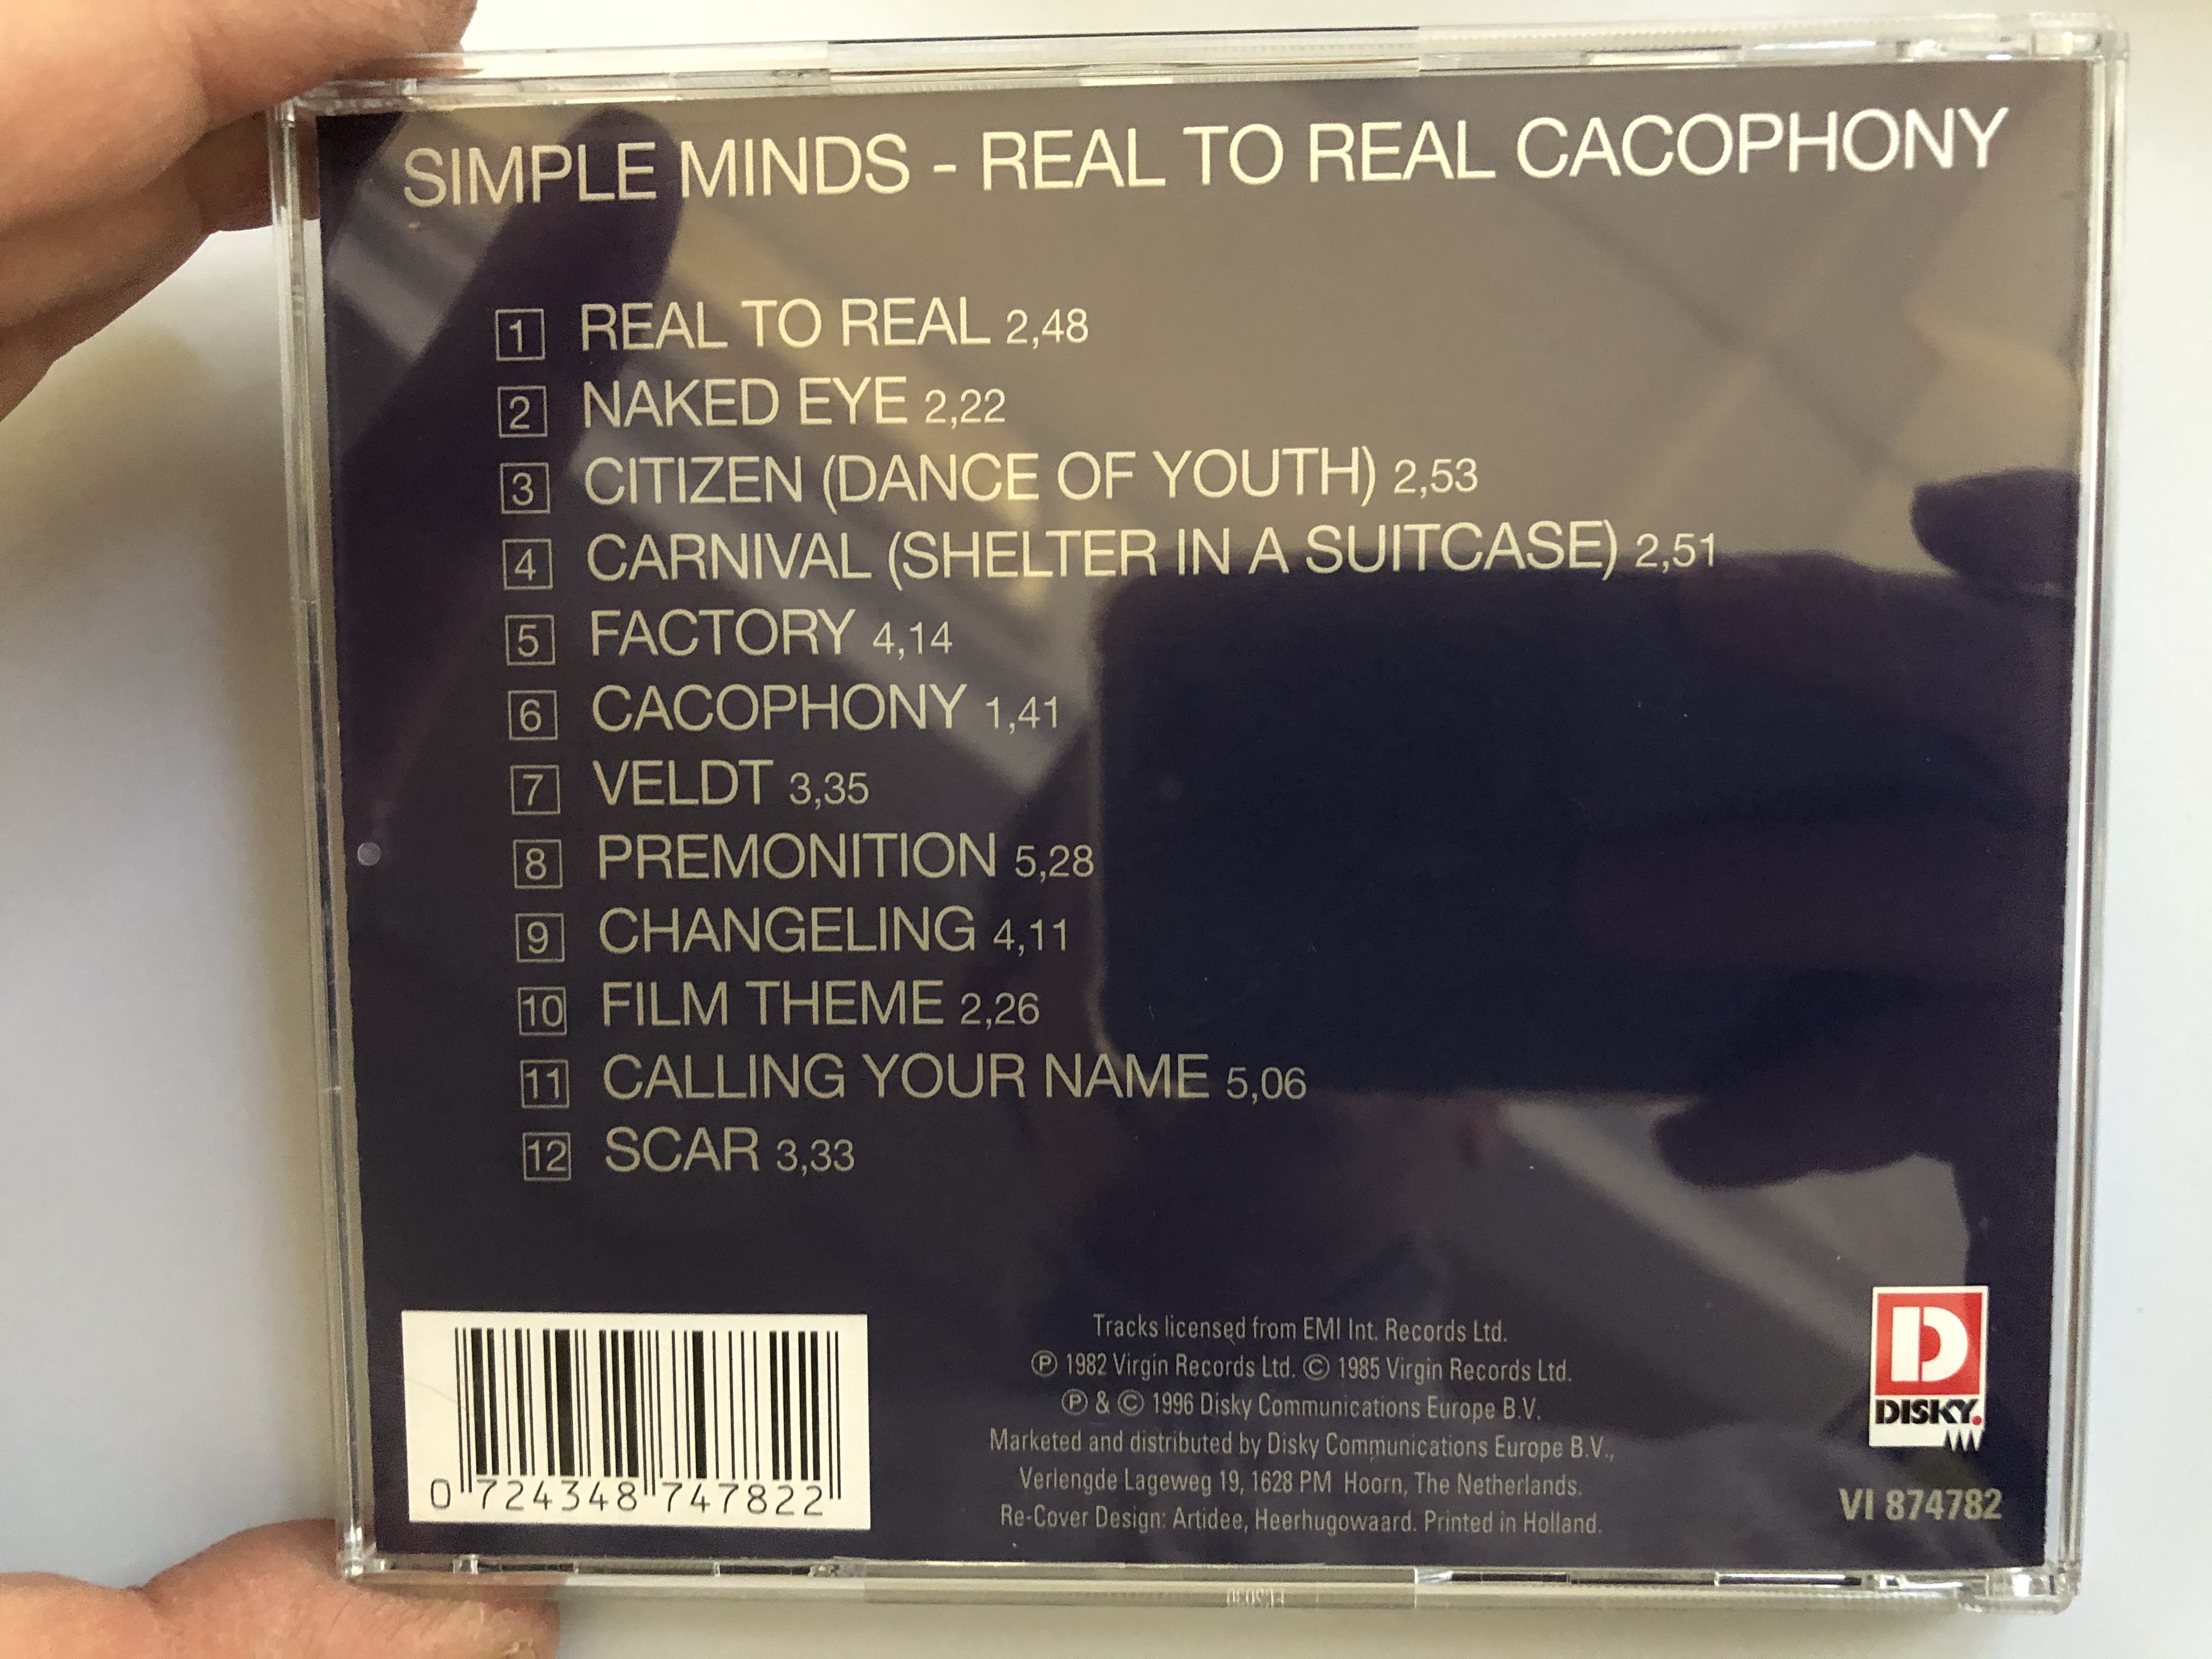 simple-minds-real-to-real-cacophony-disky-audio-cd-1996-vi-874782-4-.jpg